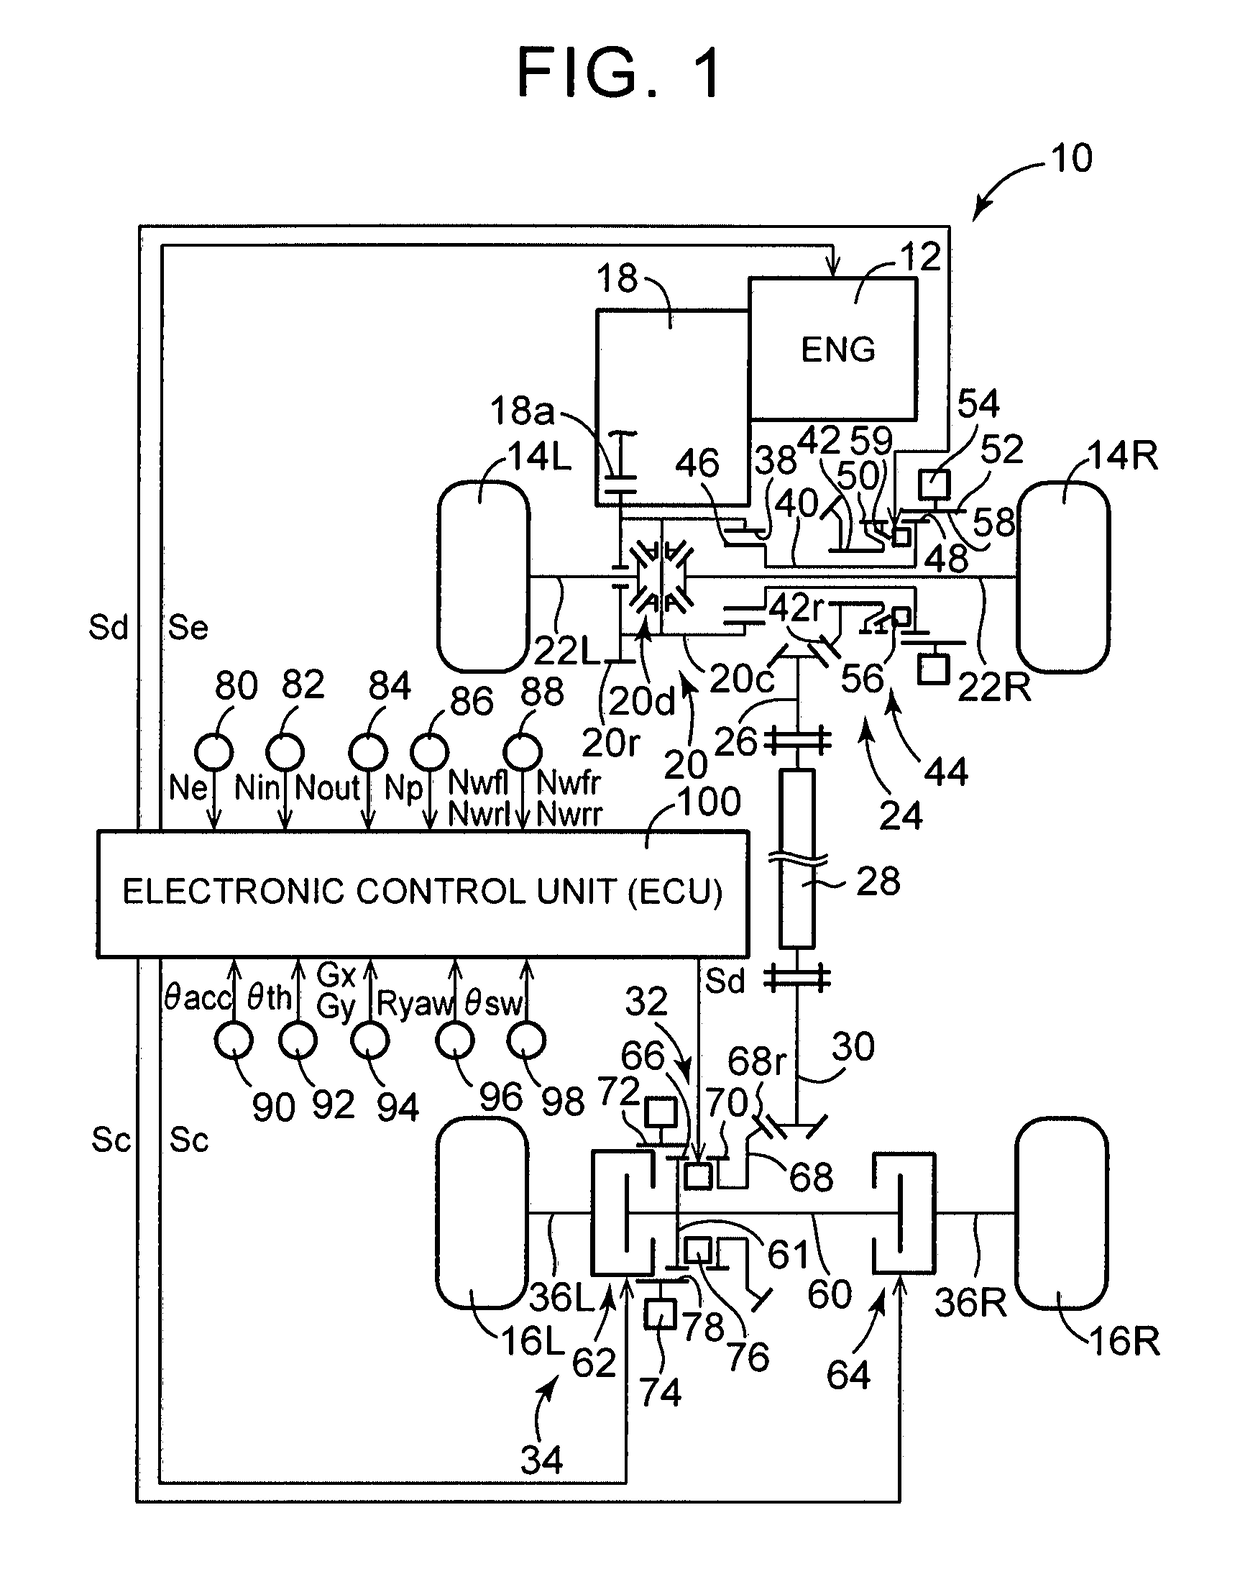 Control device for four wheel drive vehicle